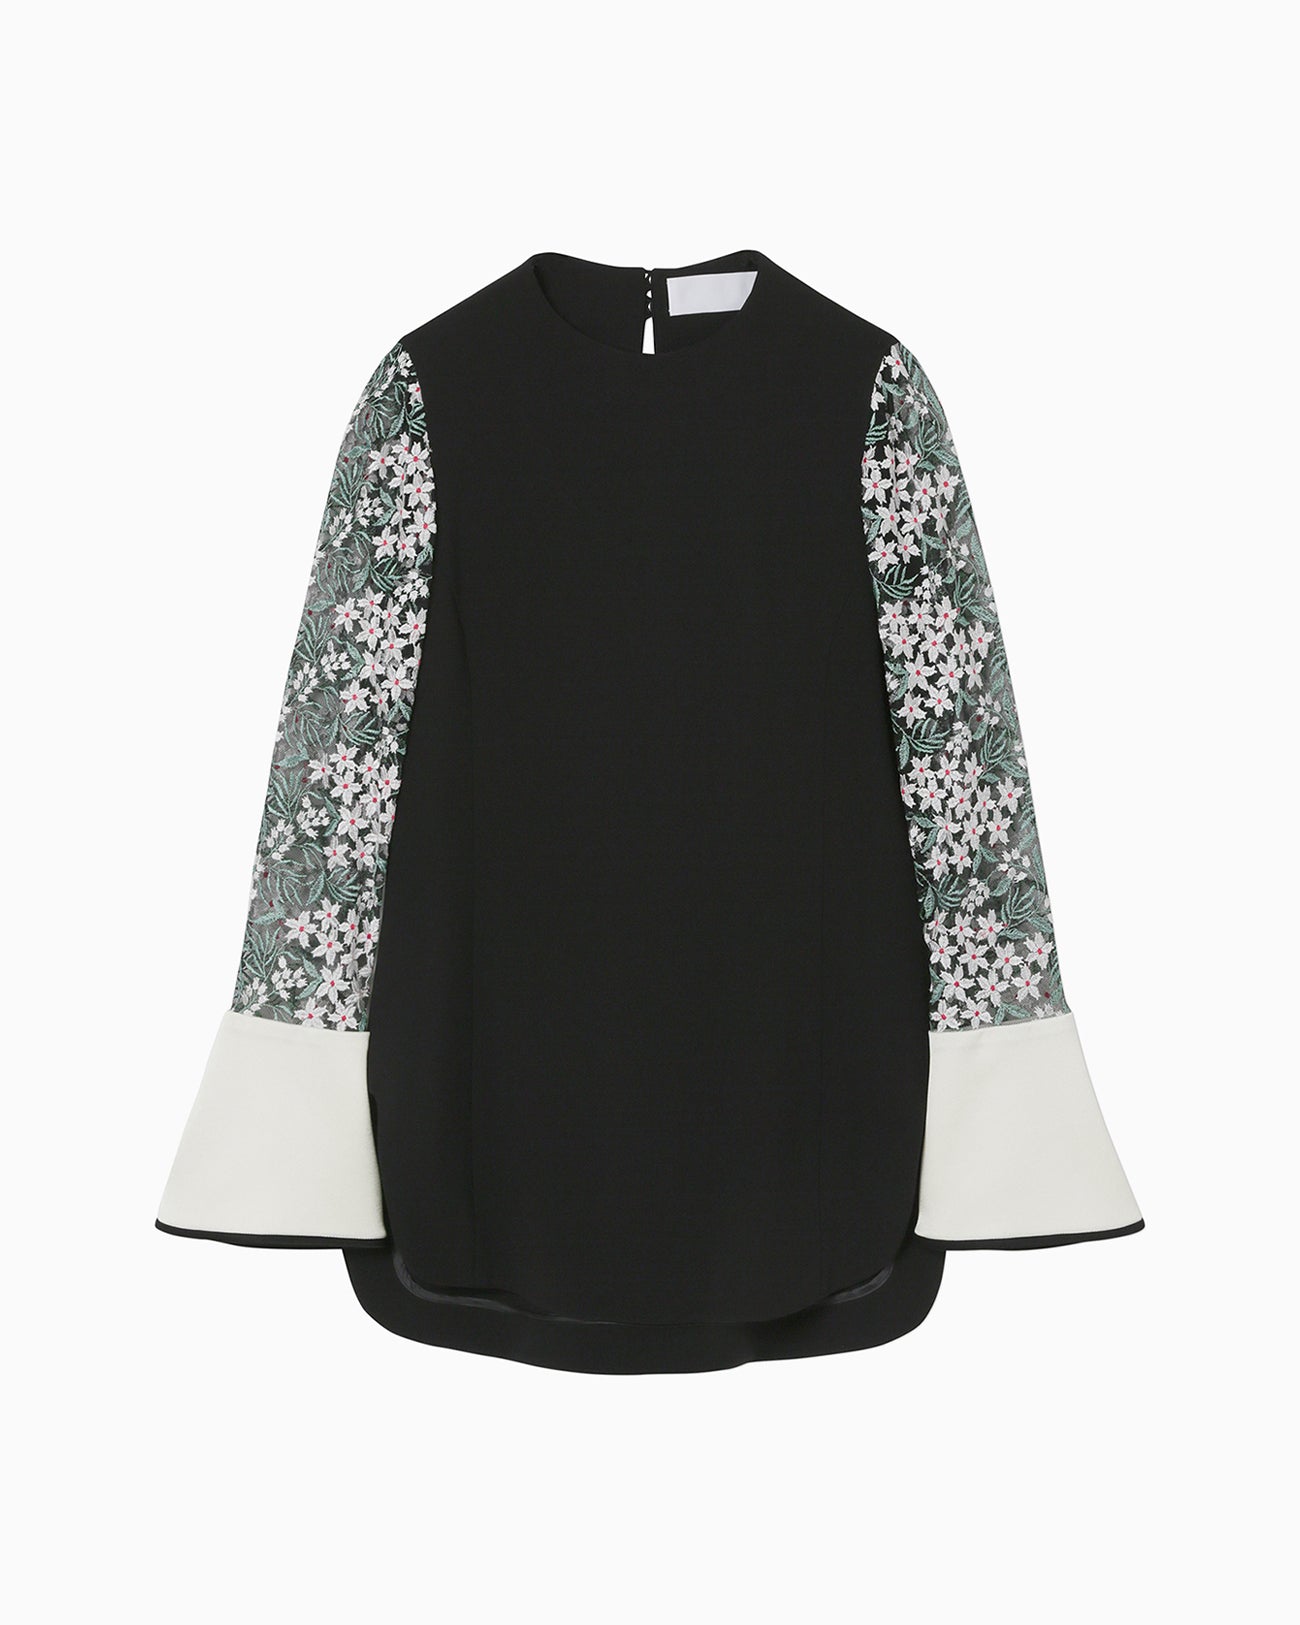 mame ☆ embroidery lace tops